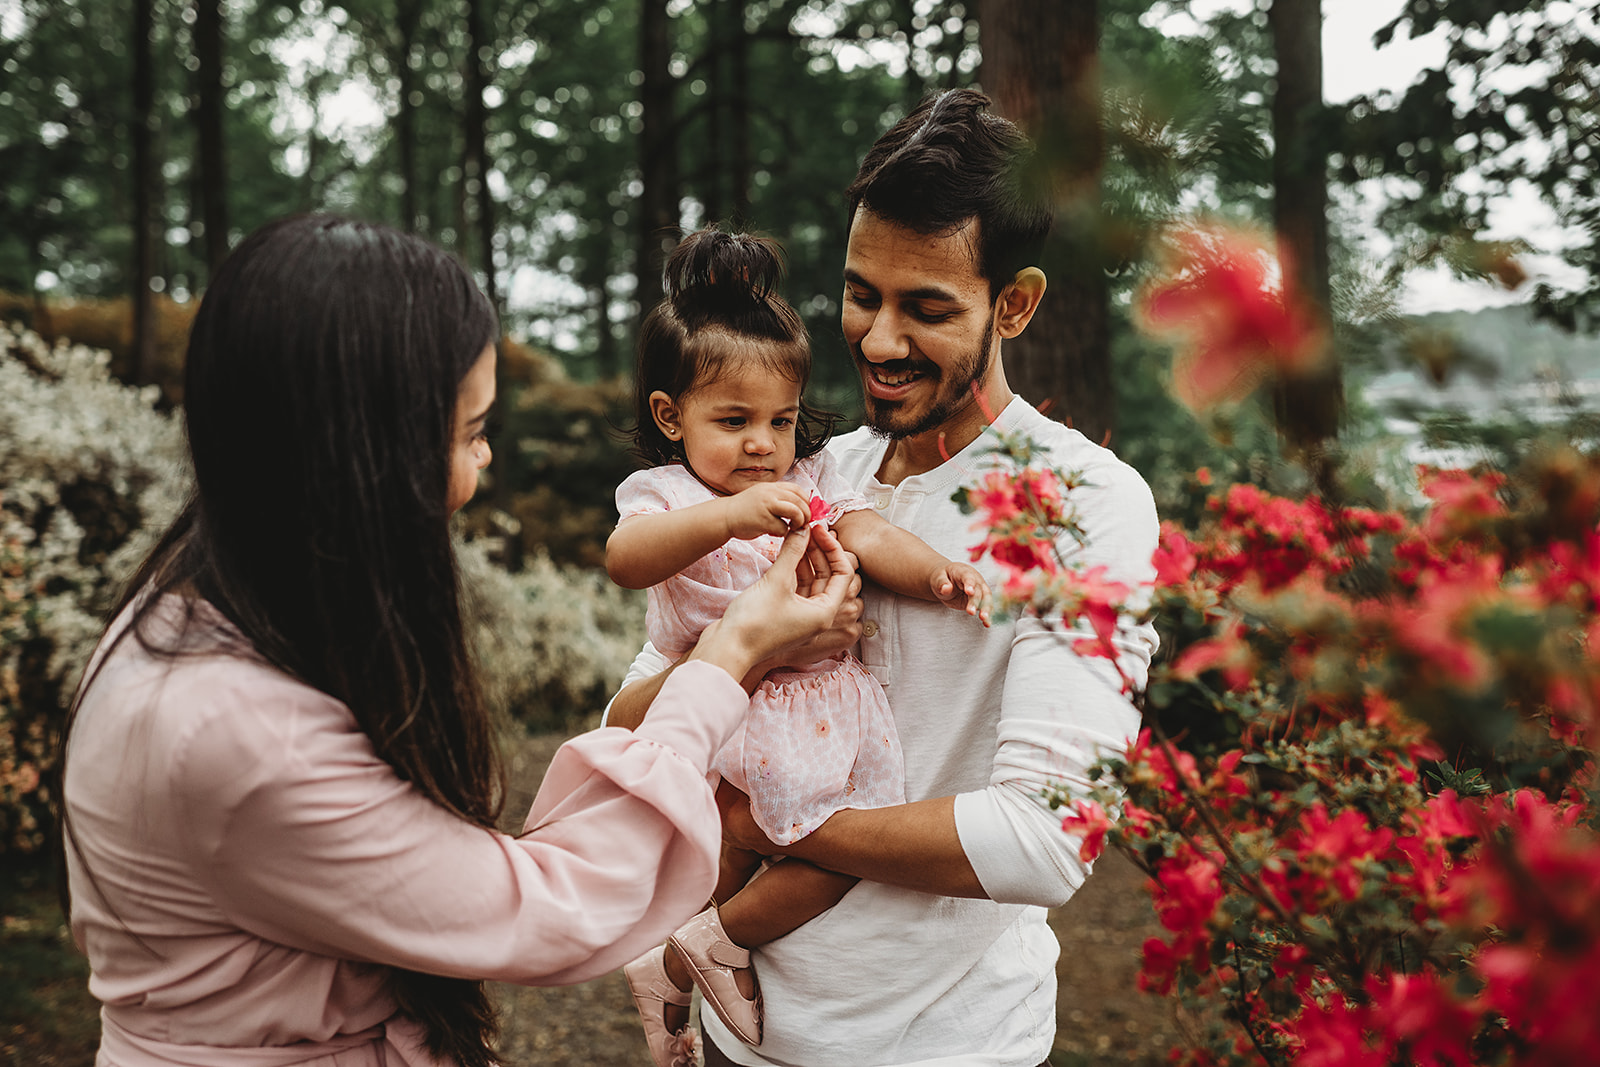 Maryland family photos with father holding toddler daughter as the mother shows the child flowers